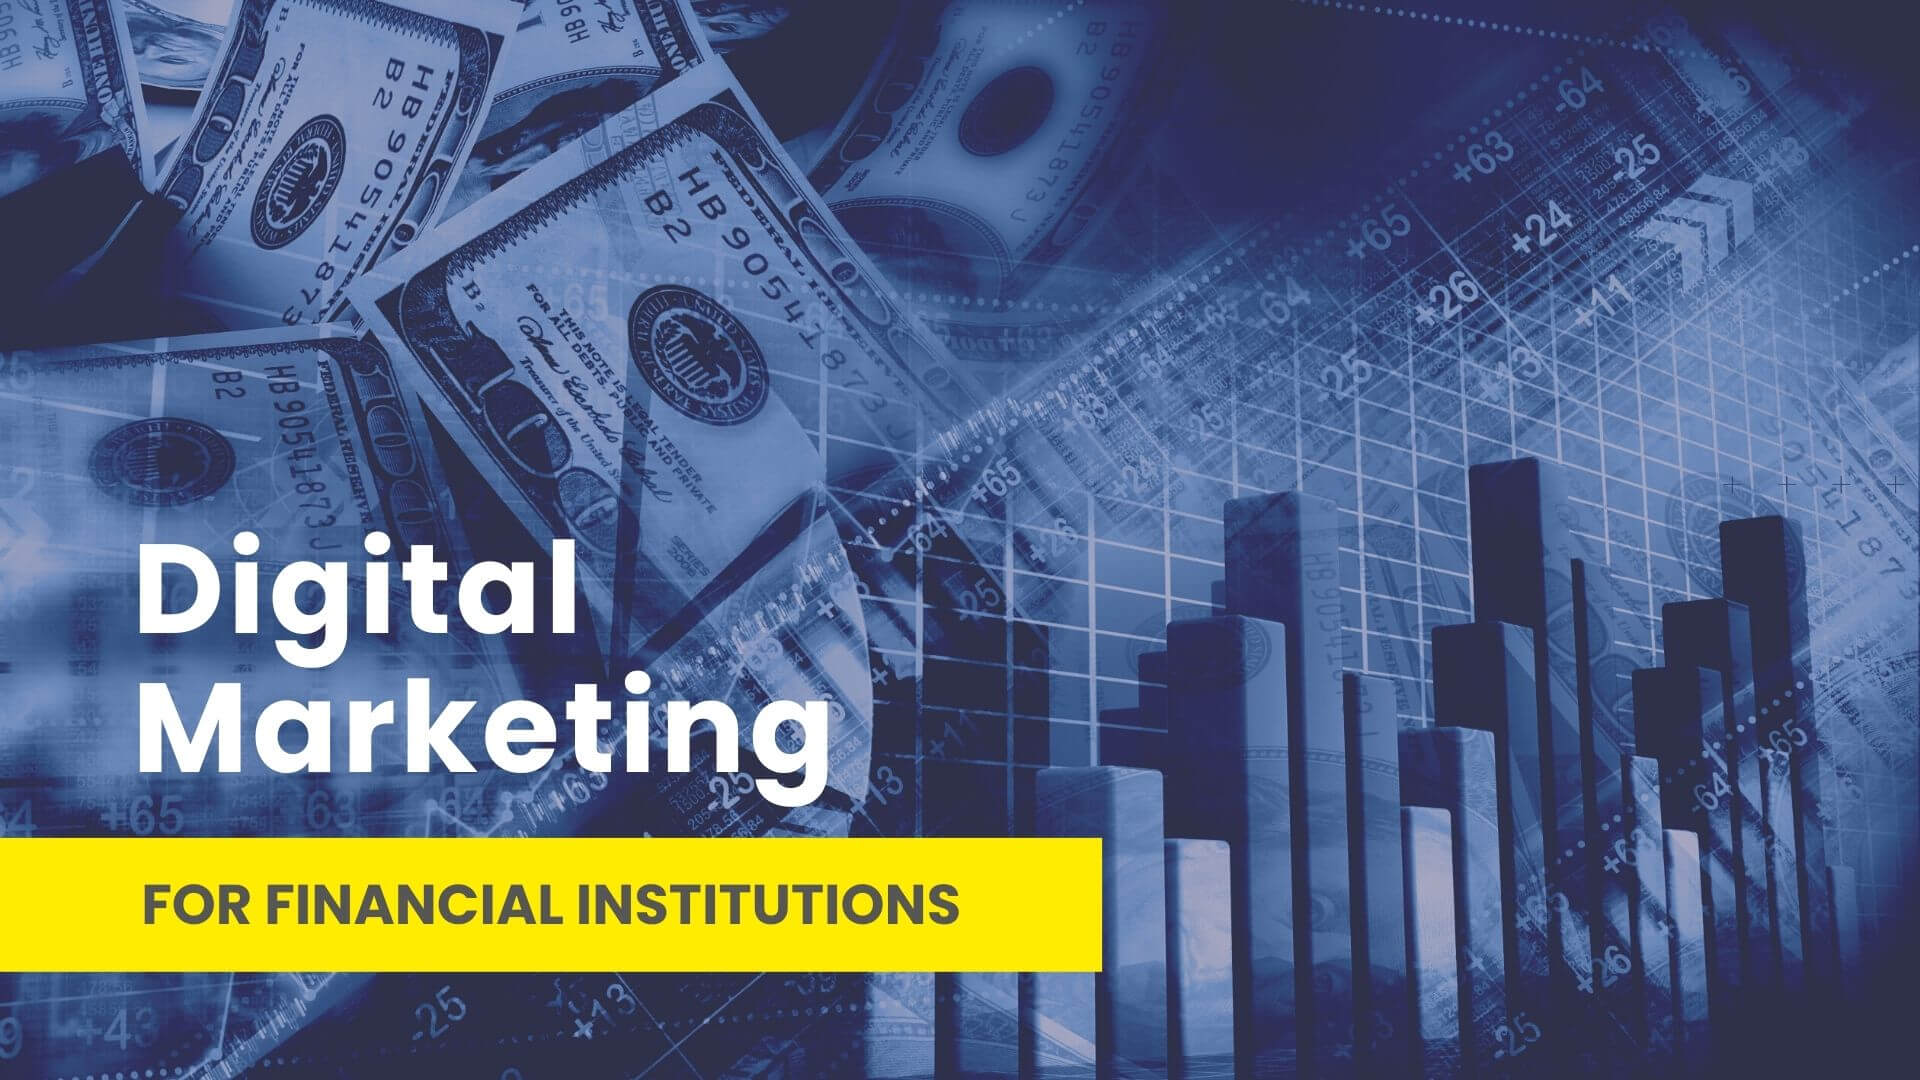 Digital Marketing for Financial Institutions